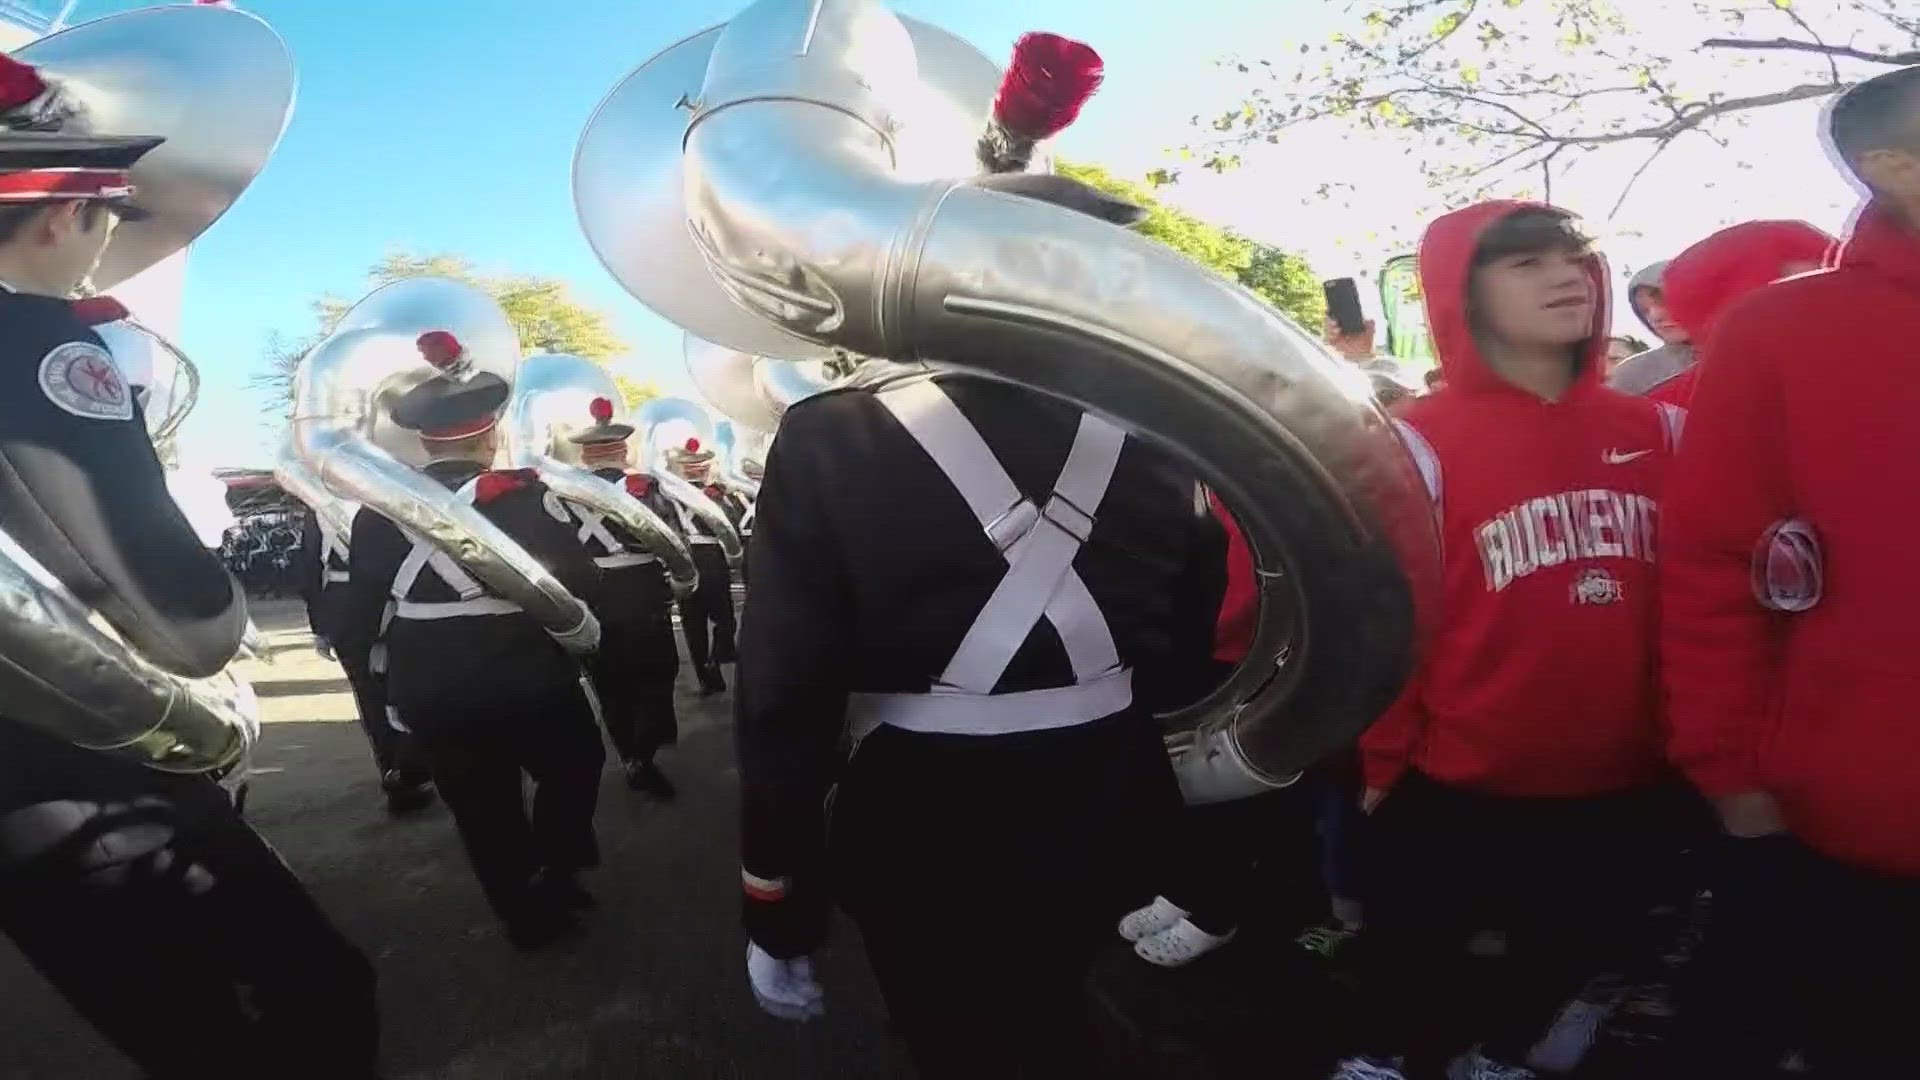 It's not just the football team bringing the energy to each and every college game. The Best Damn Band In The Land has also made its own winning reputation